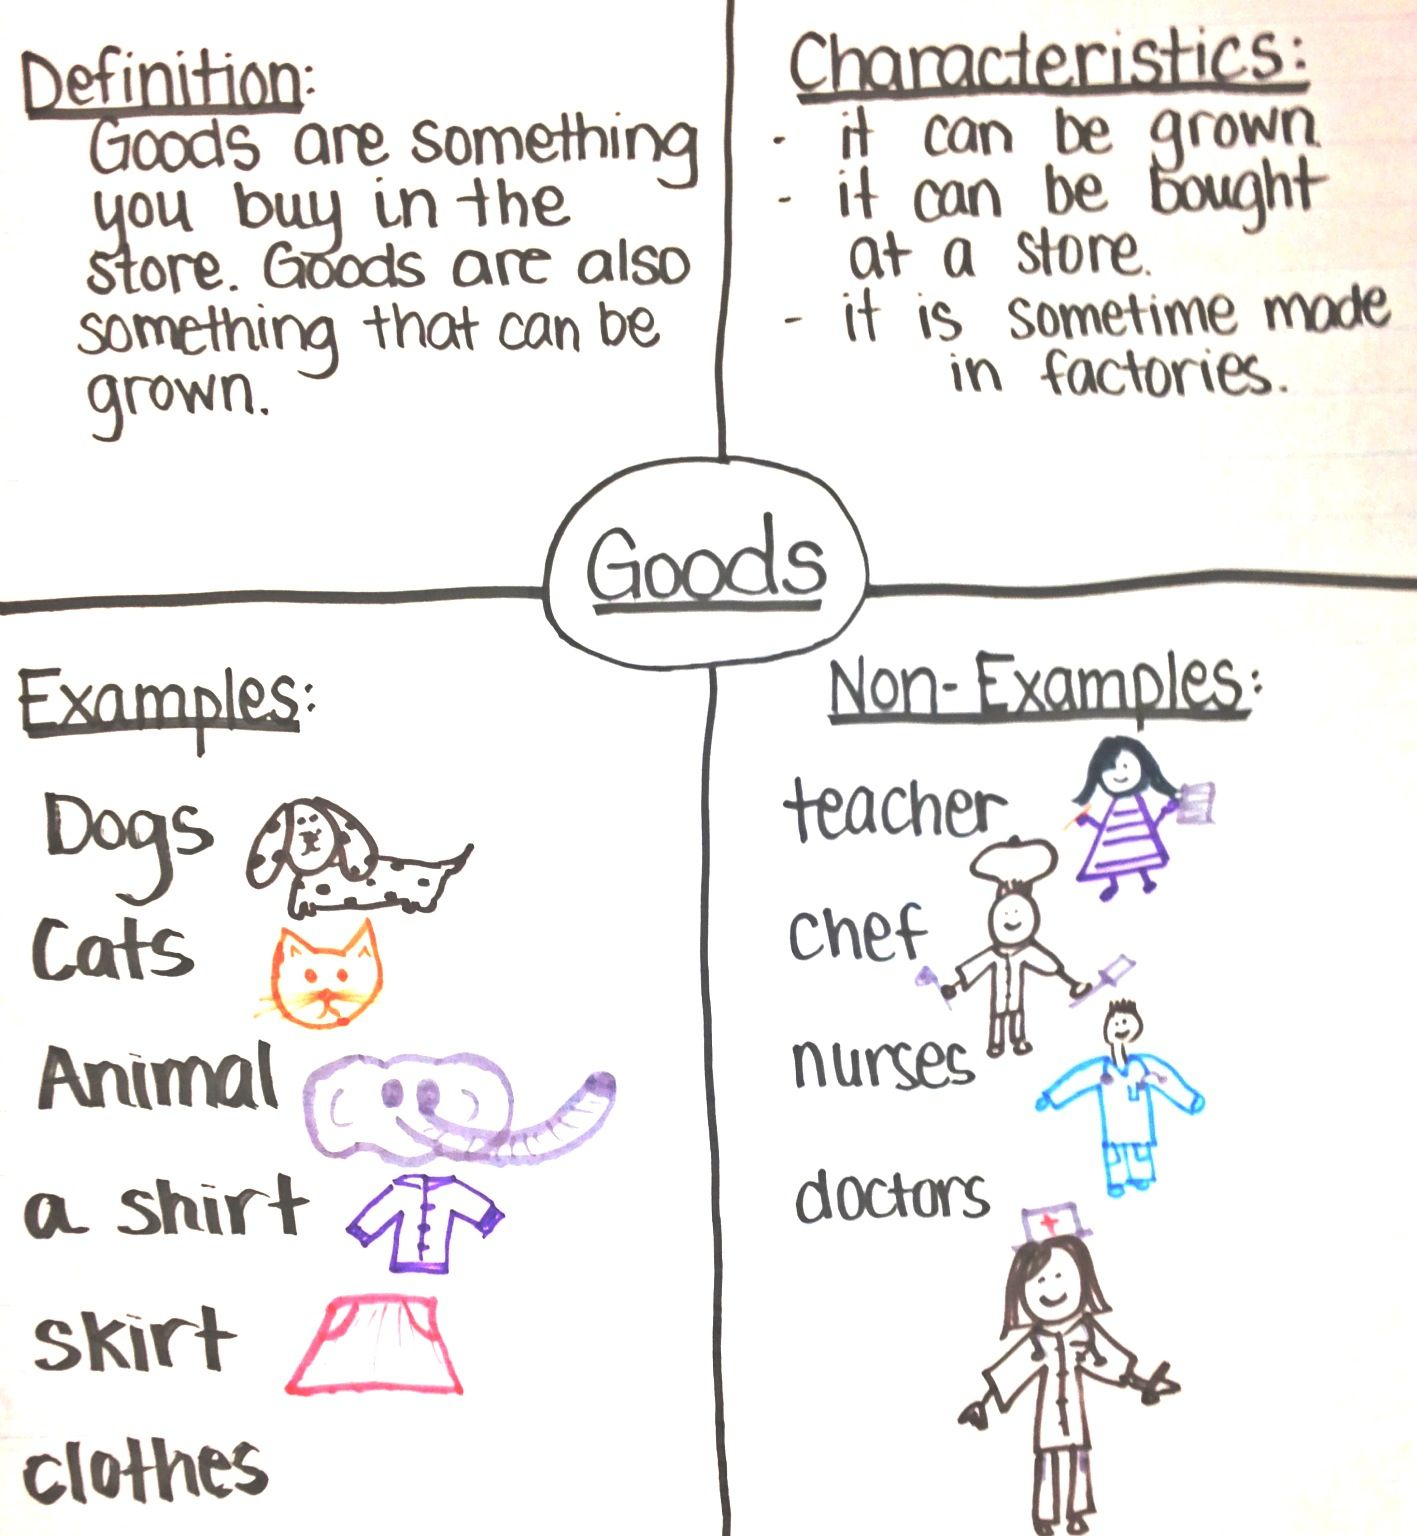 1St Grade Social Studies On Goods And Services | Social